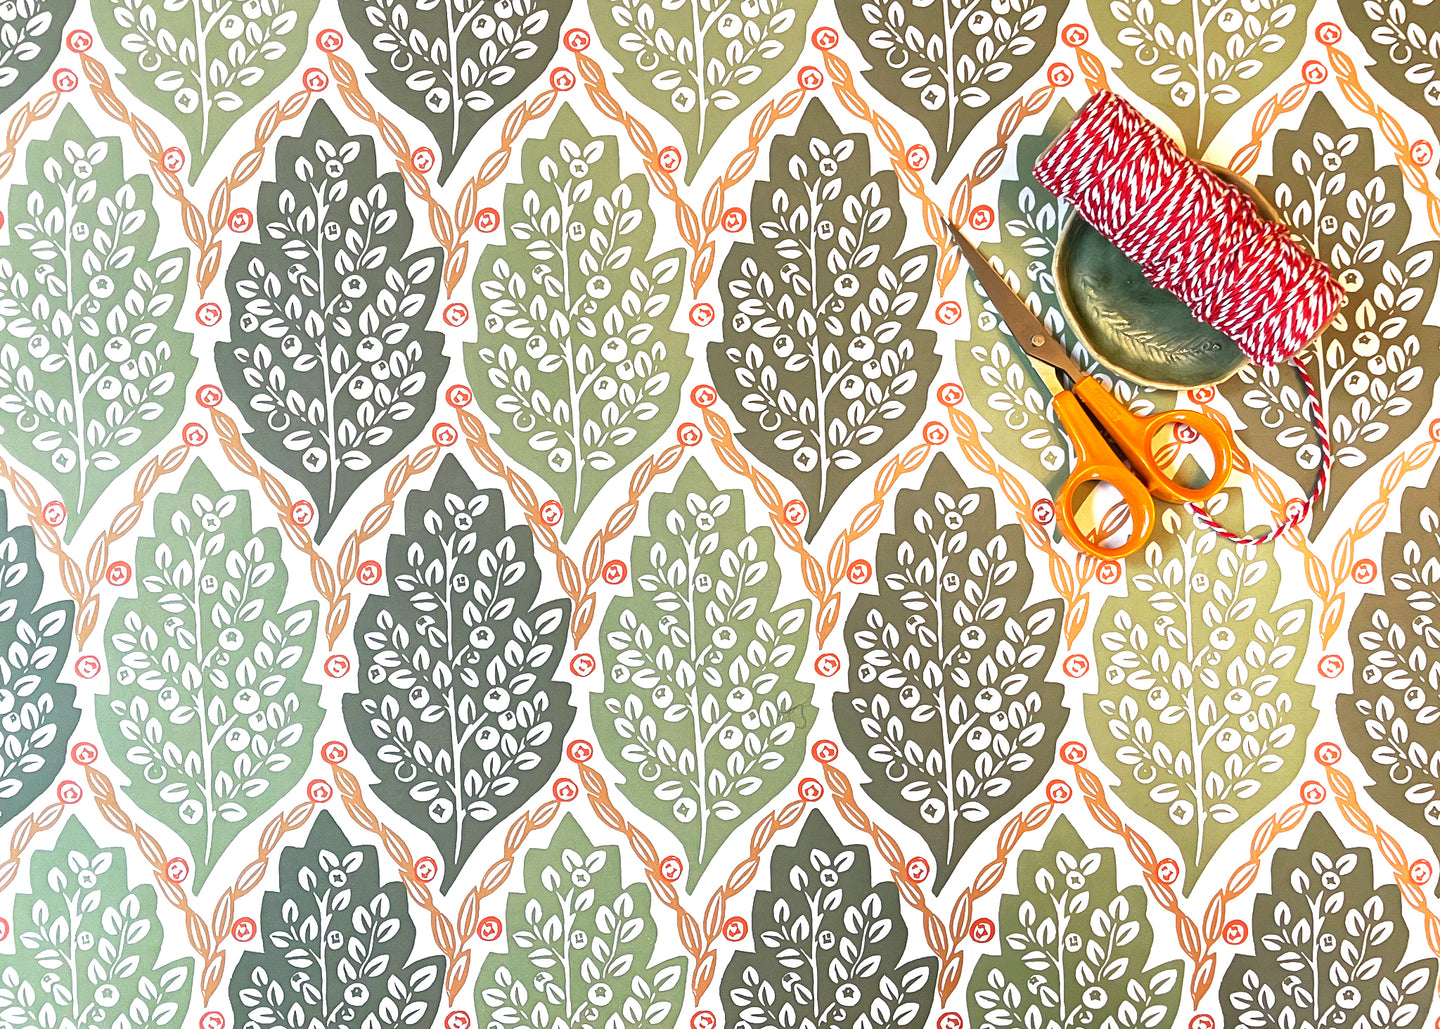 'Cotoneaster & Leaf' wrapping paper